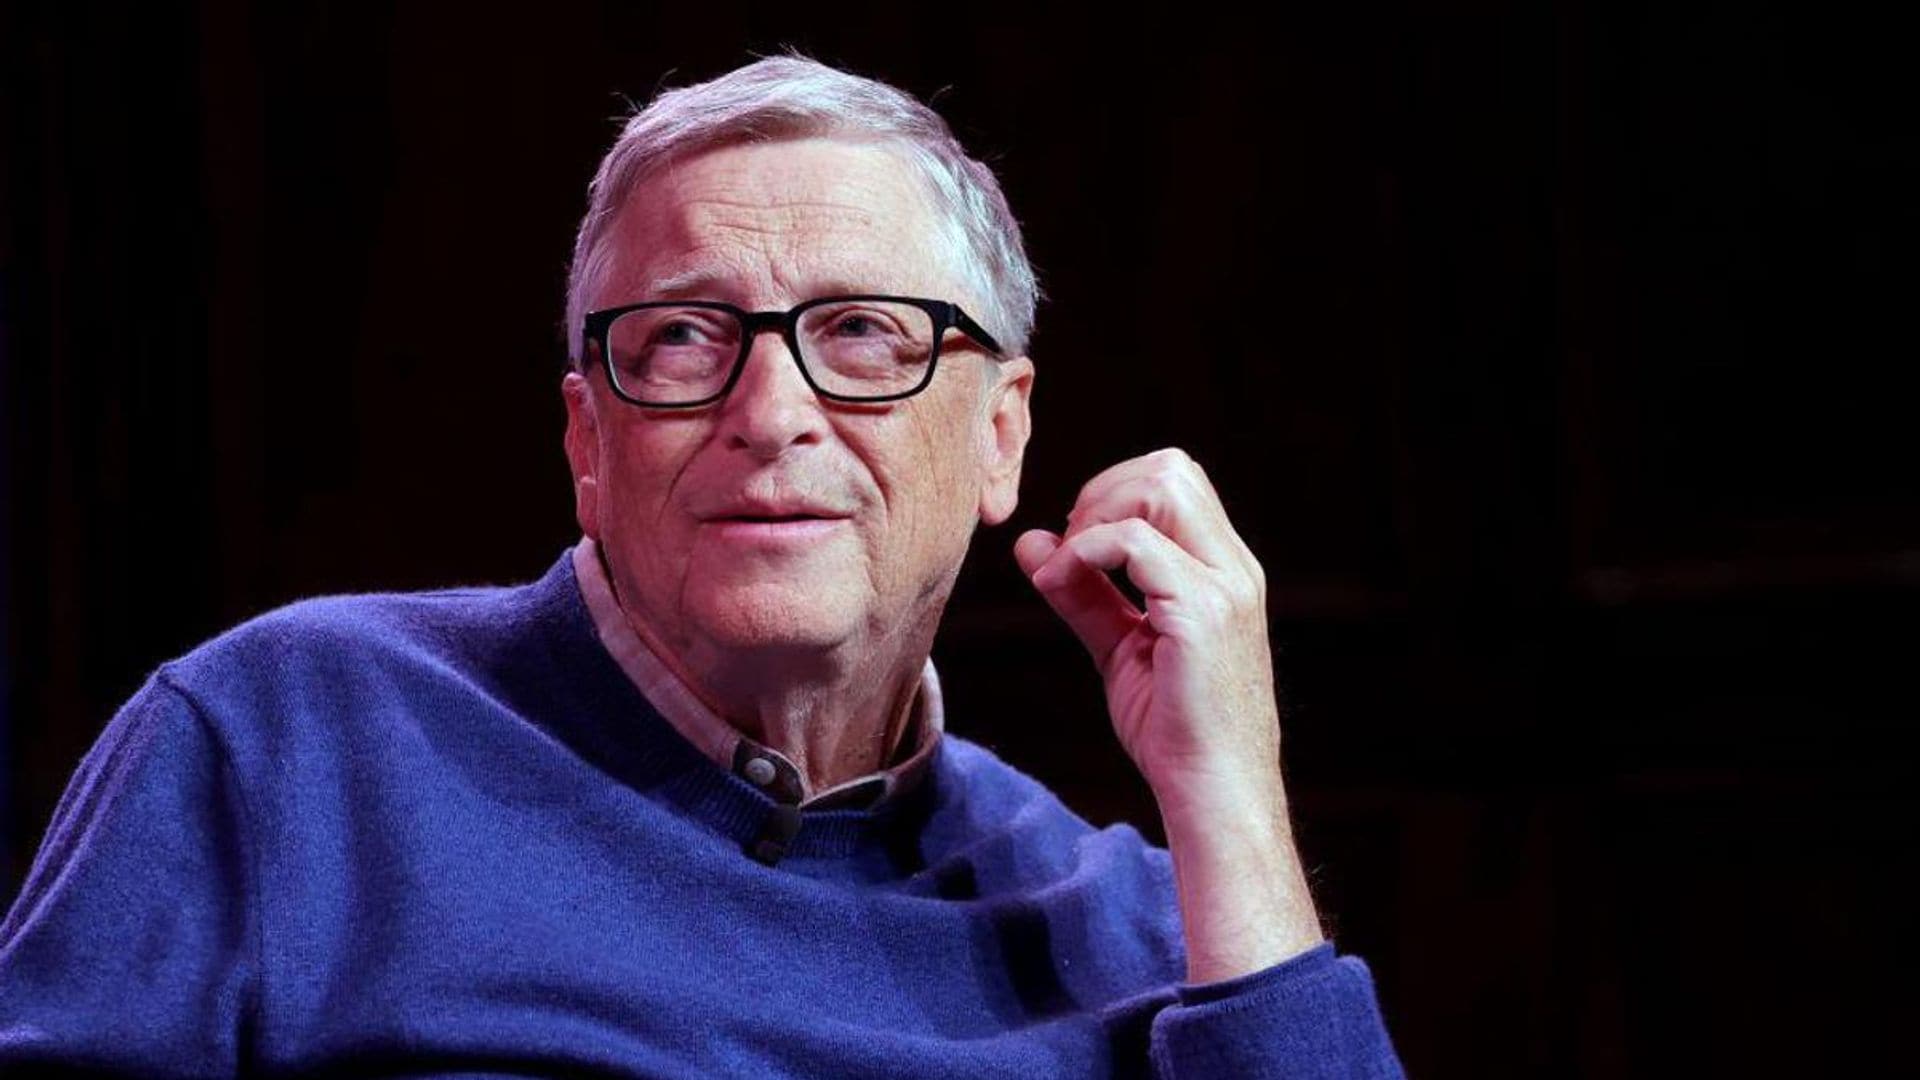 Unlock your success with Bill Gates’ 5-hour rule